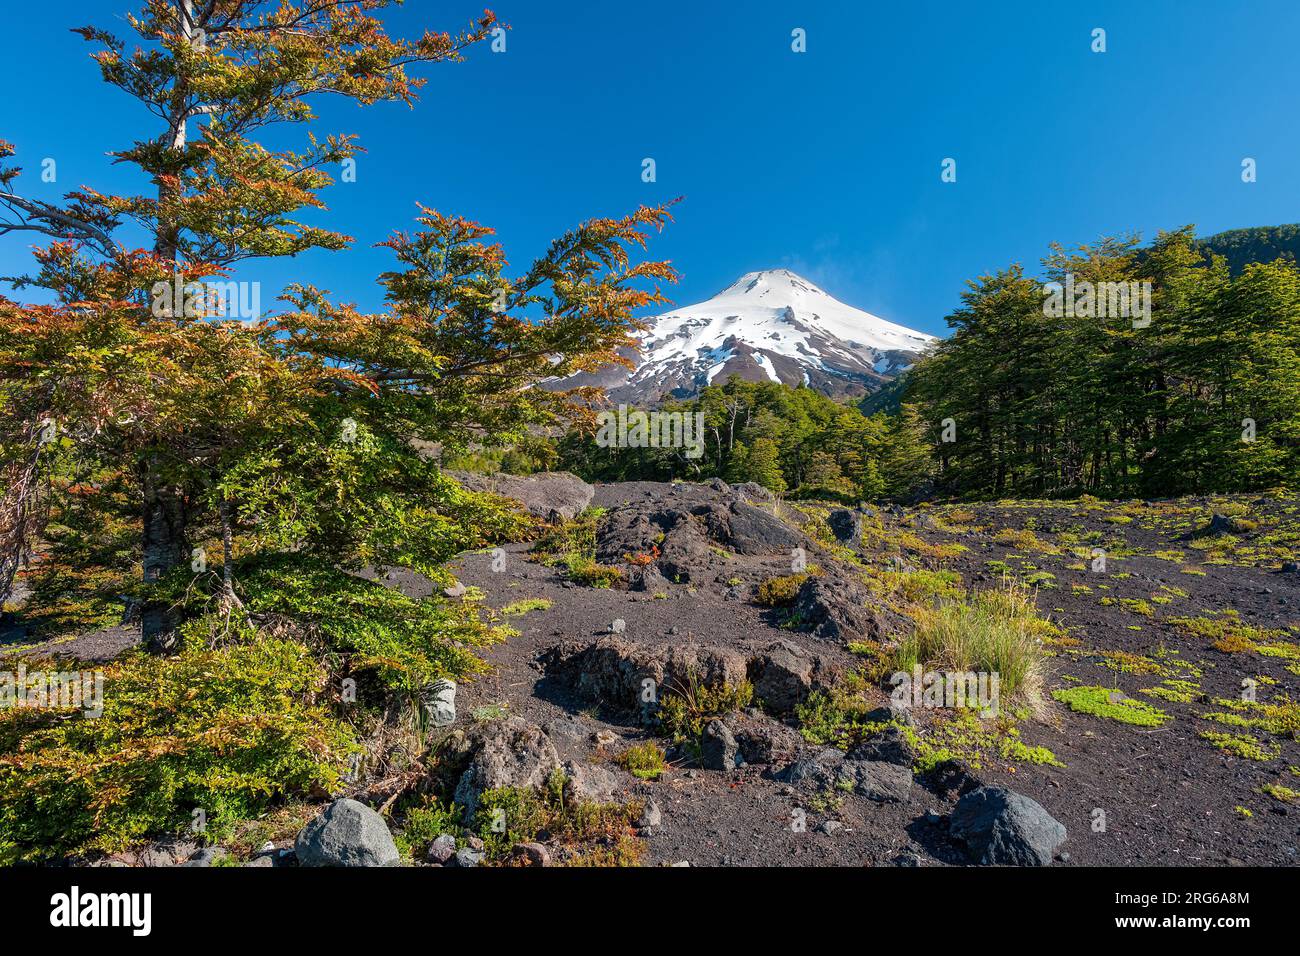 View of the summit of the villarrica volcano from the villarica national park in the araucania region of chile Stock Photo